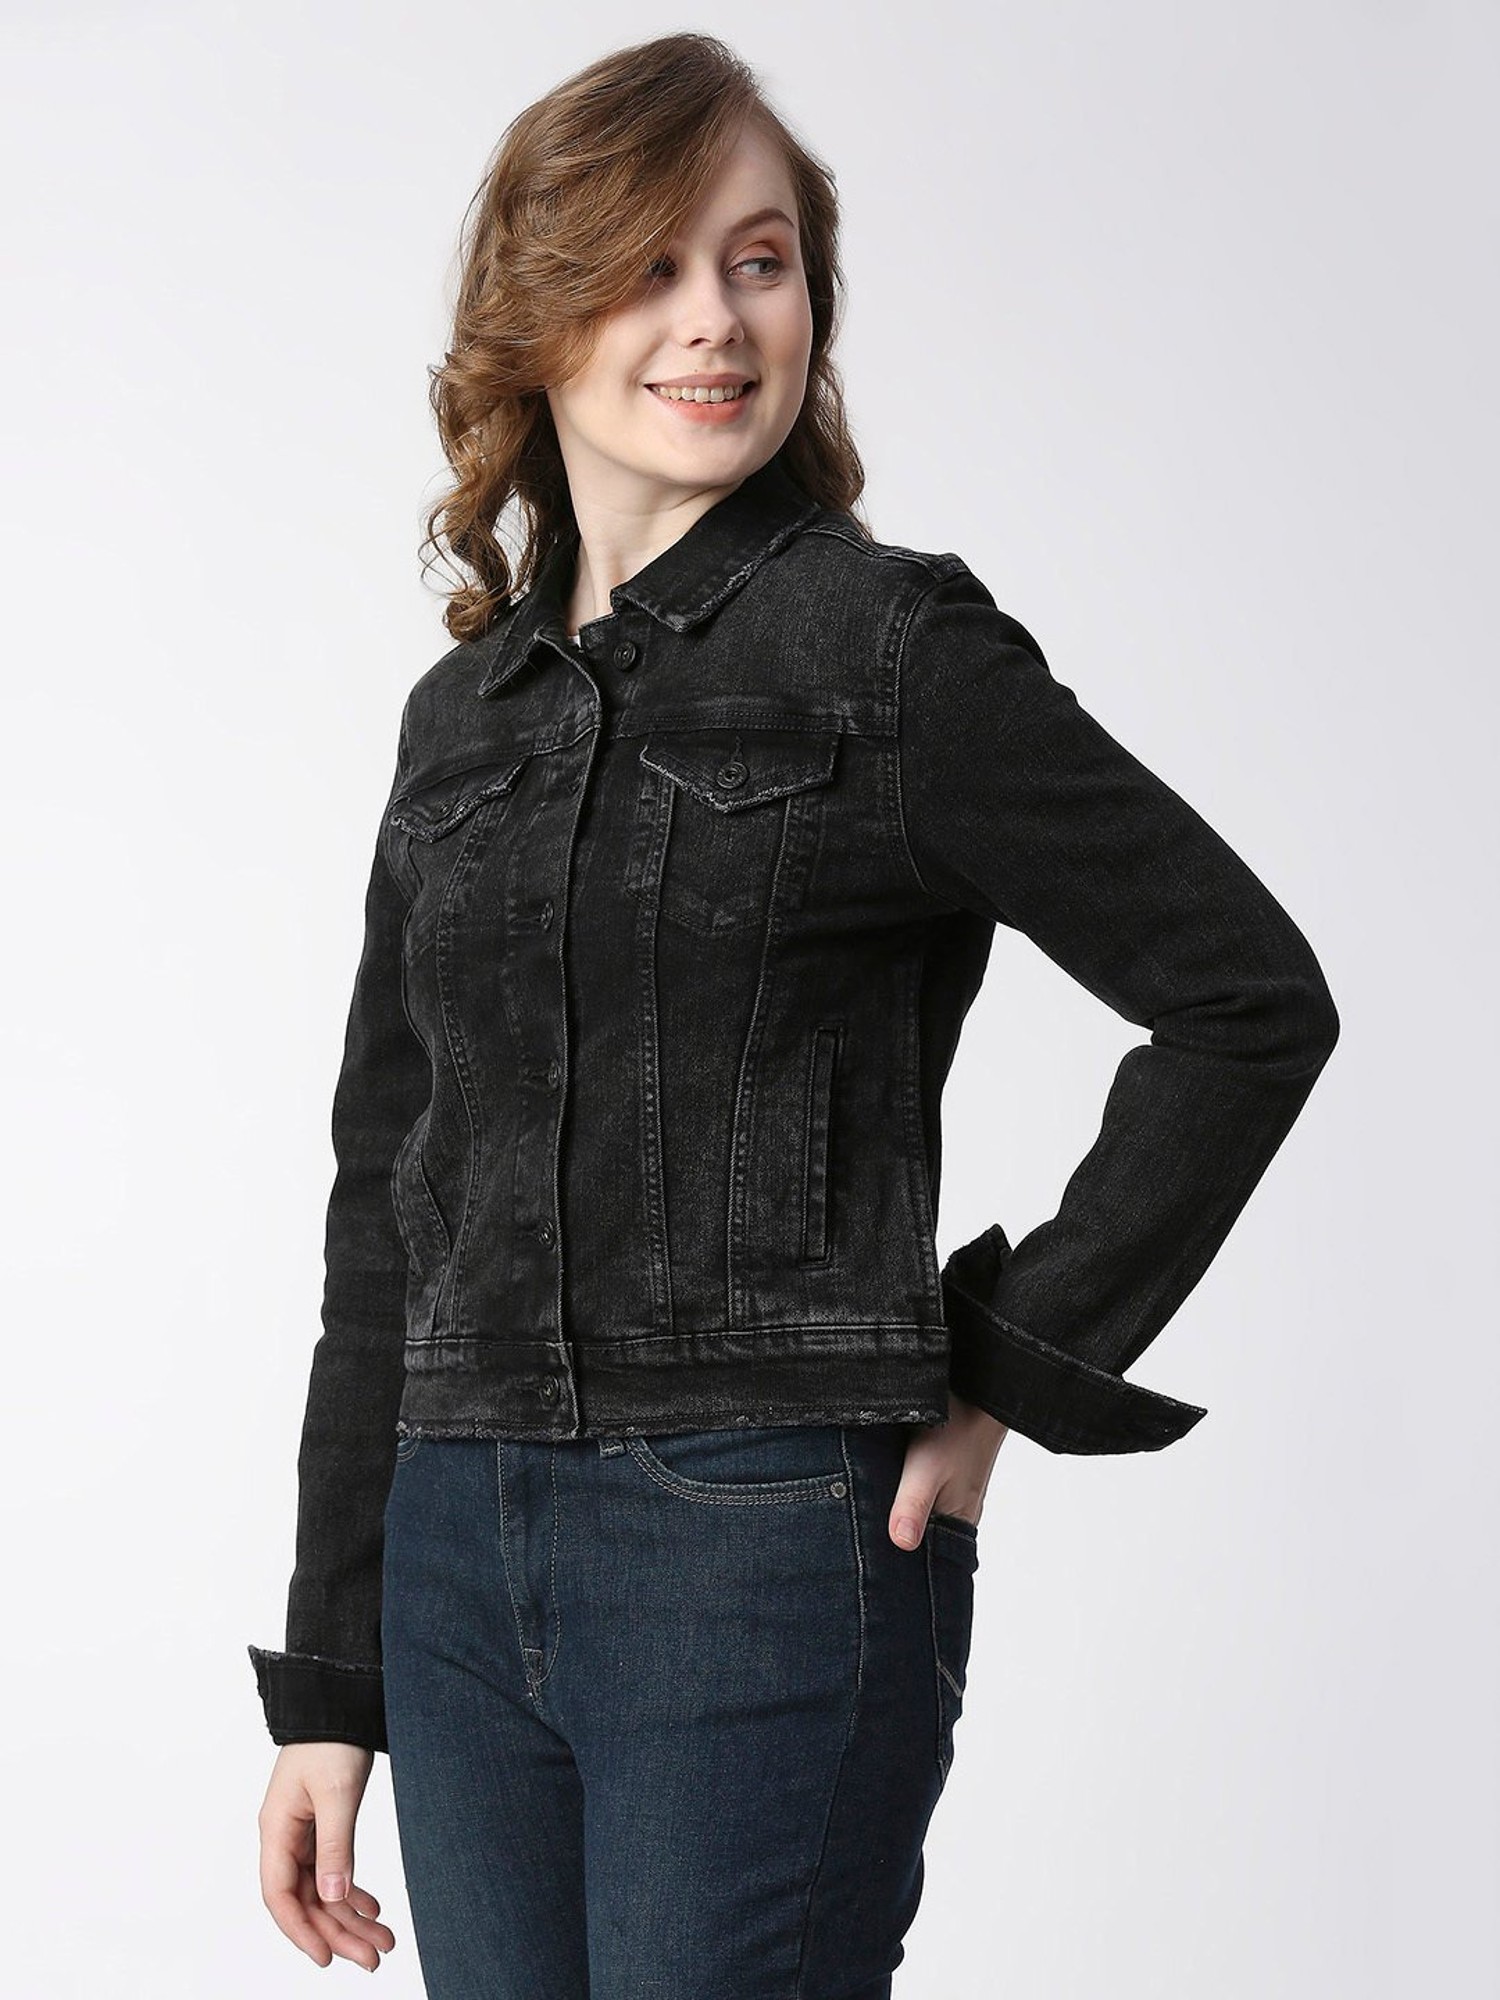 Discover 164+ black jeans jacket womens best